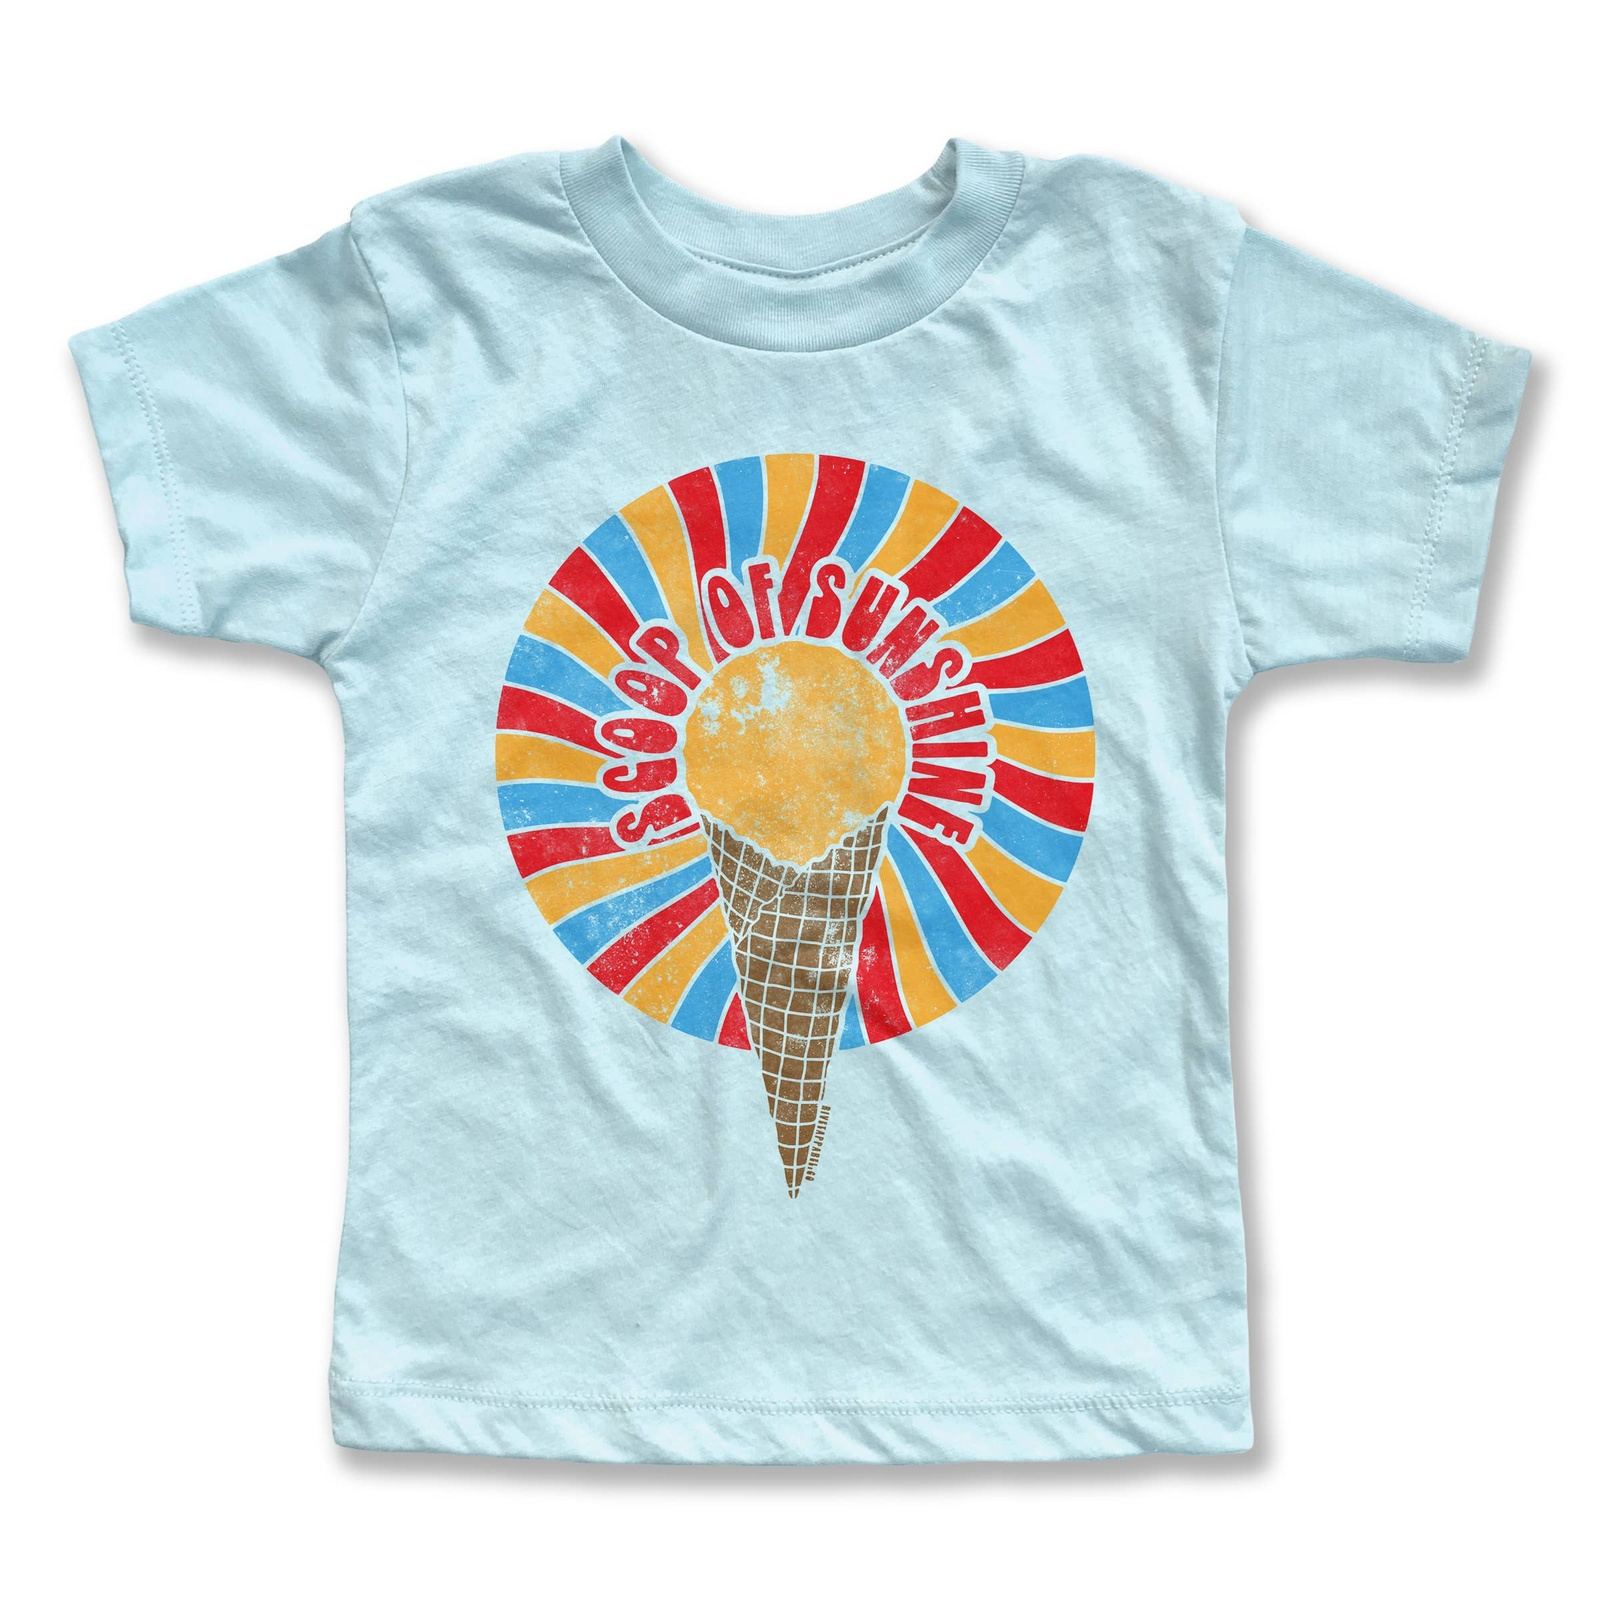 Scoop of Sunshine Tee Tea for Three: A Children's Boutique